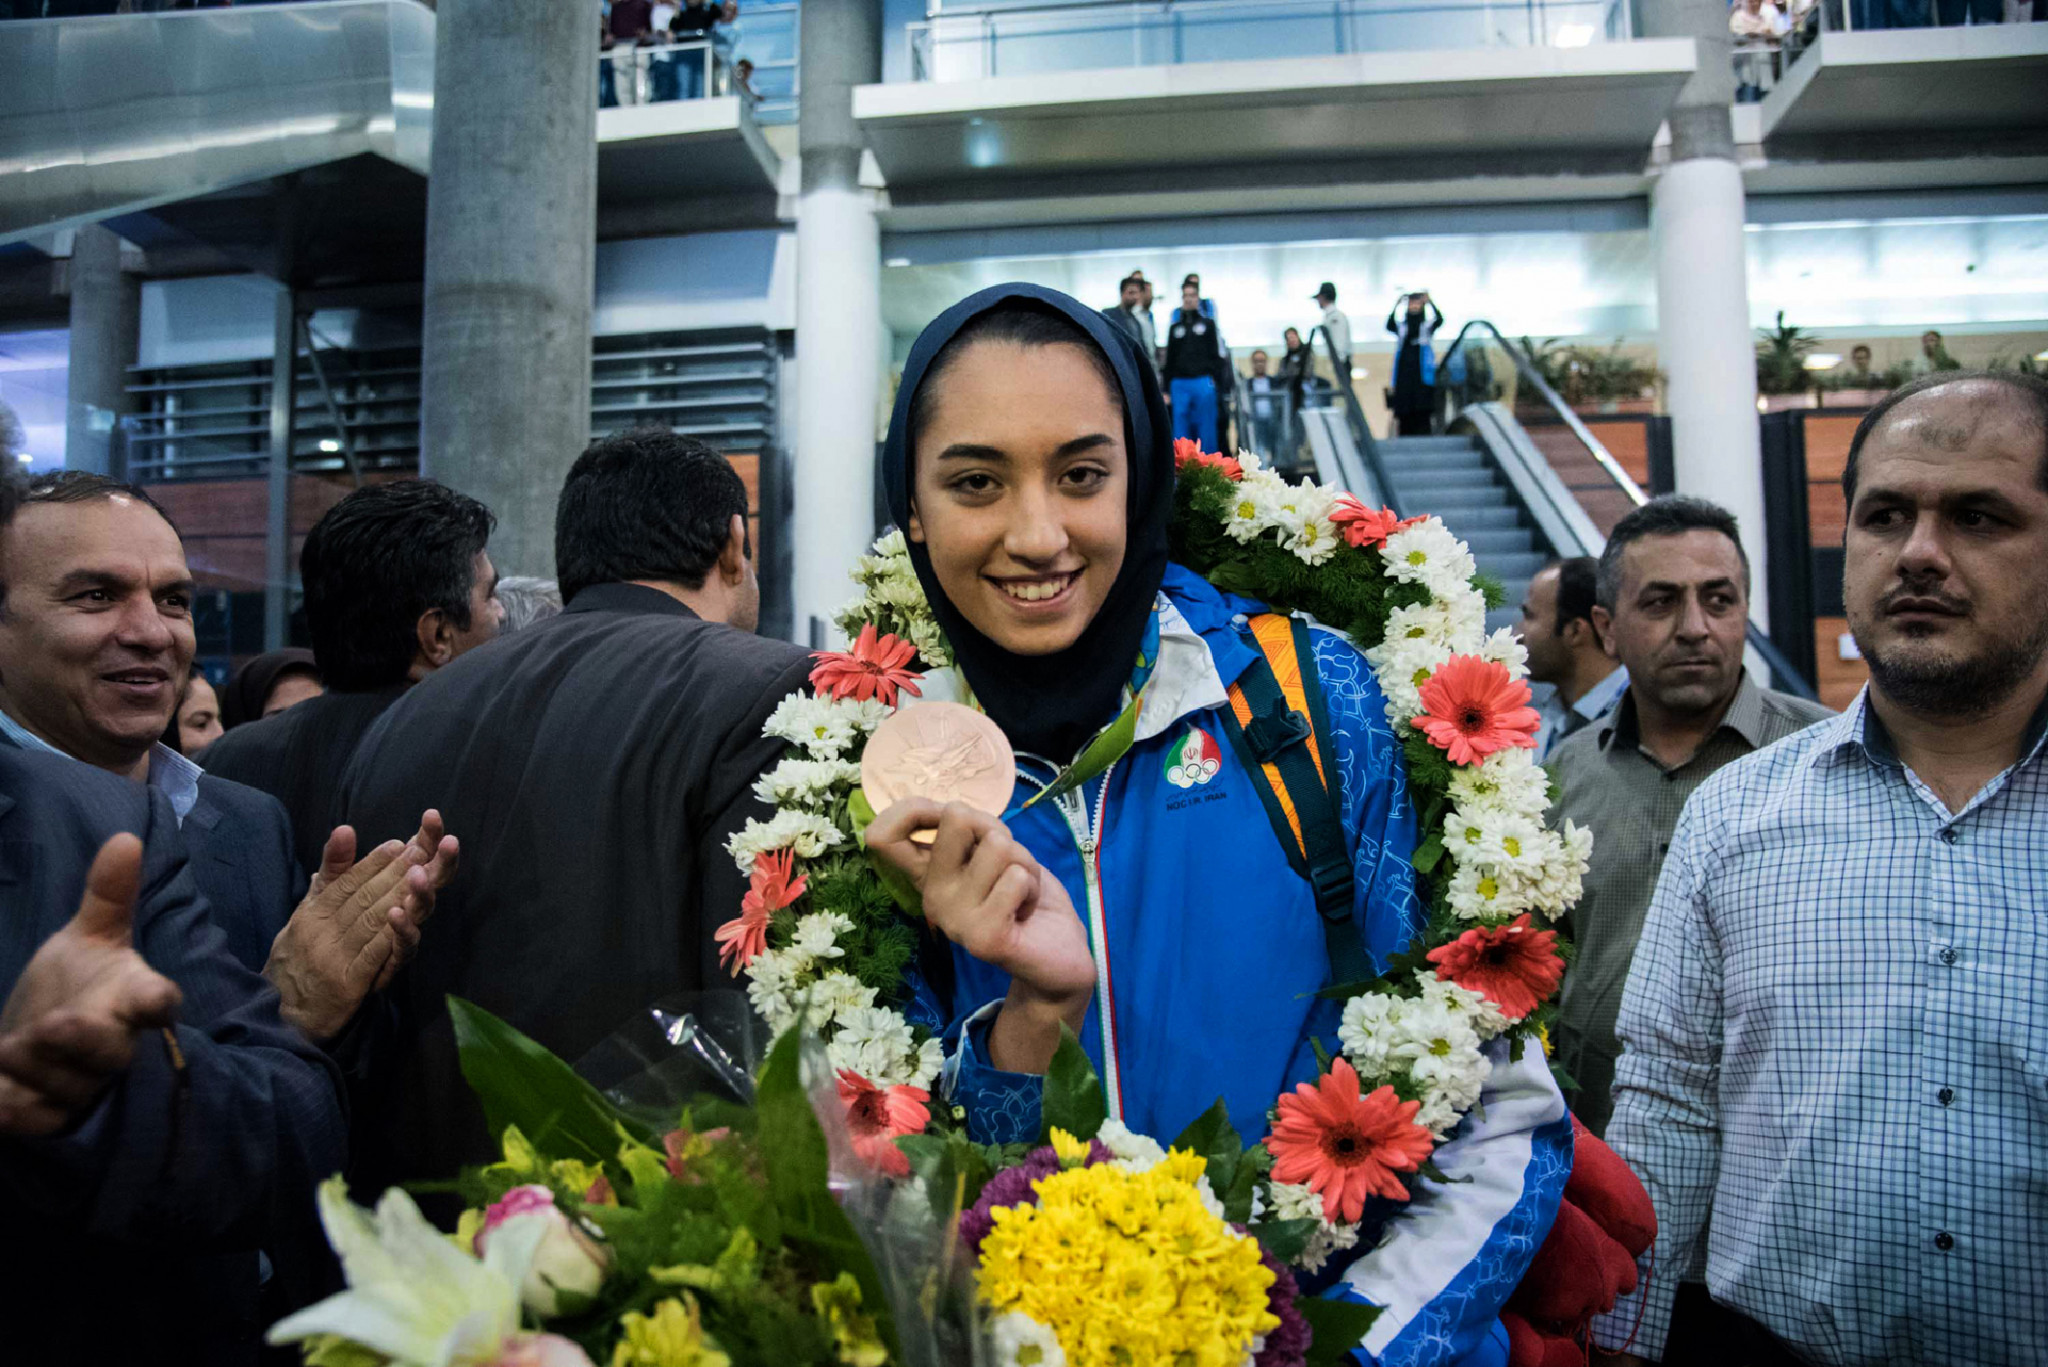 Kimia Alizadeh received a hero's welcome at the airport in Tehran after returning from Rio 2016 with a bronze medal ©Getty Images